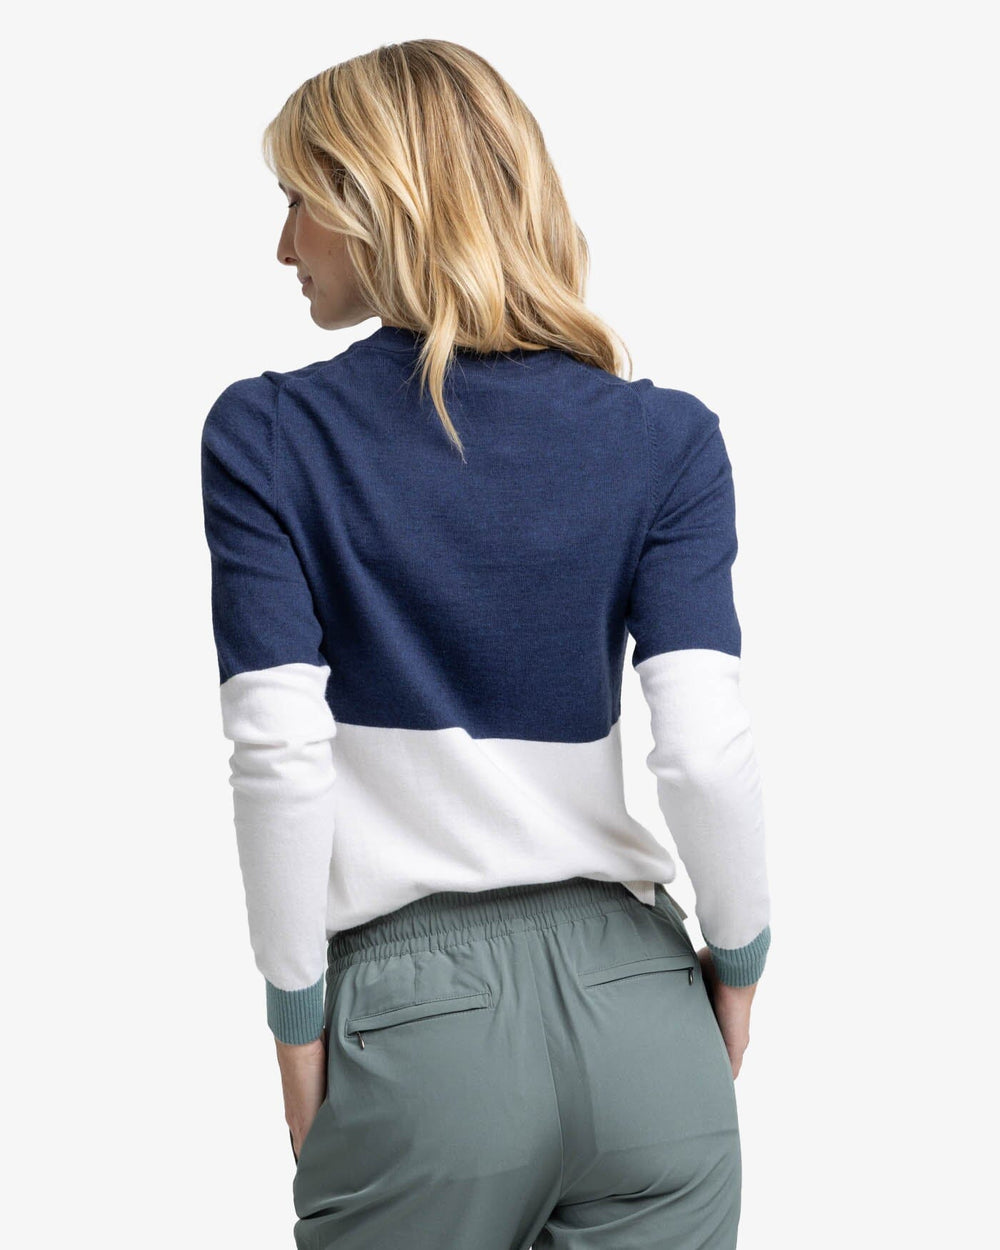 The back view of the Southern Tide Colorblock Fireside Sweater by Southern Tide - Nautical Navy